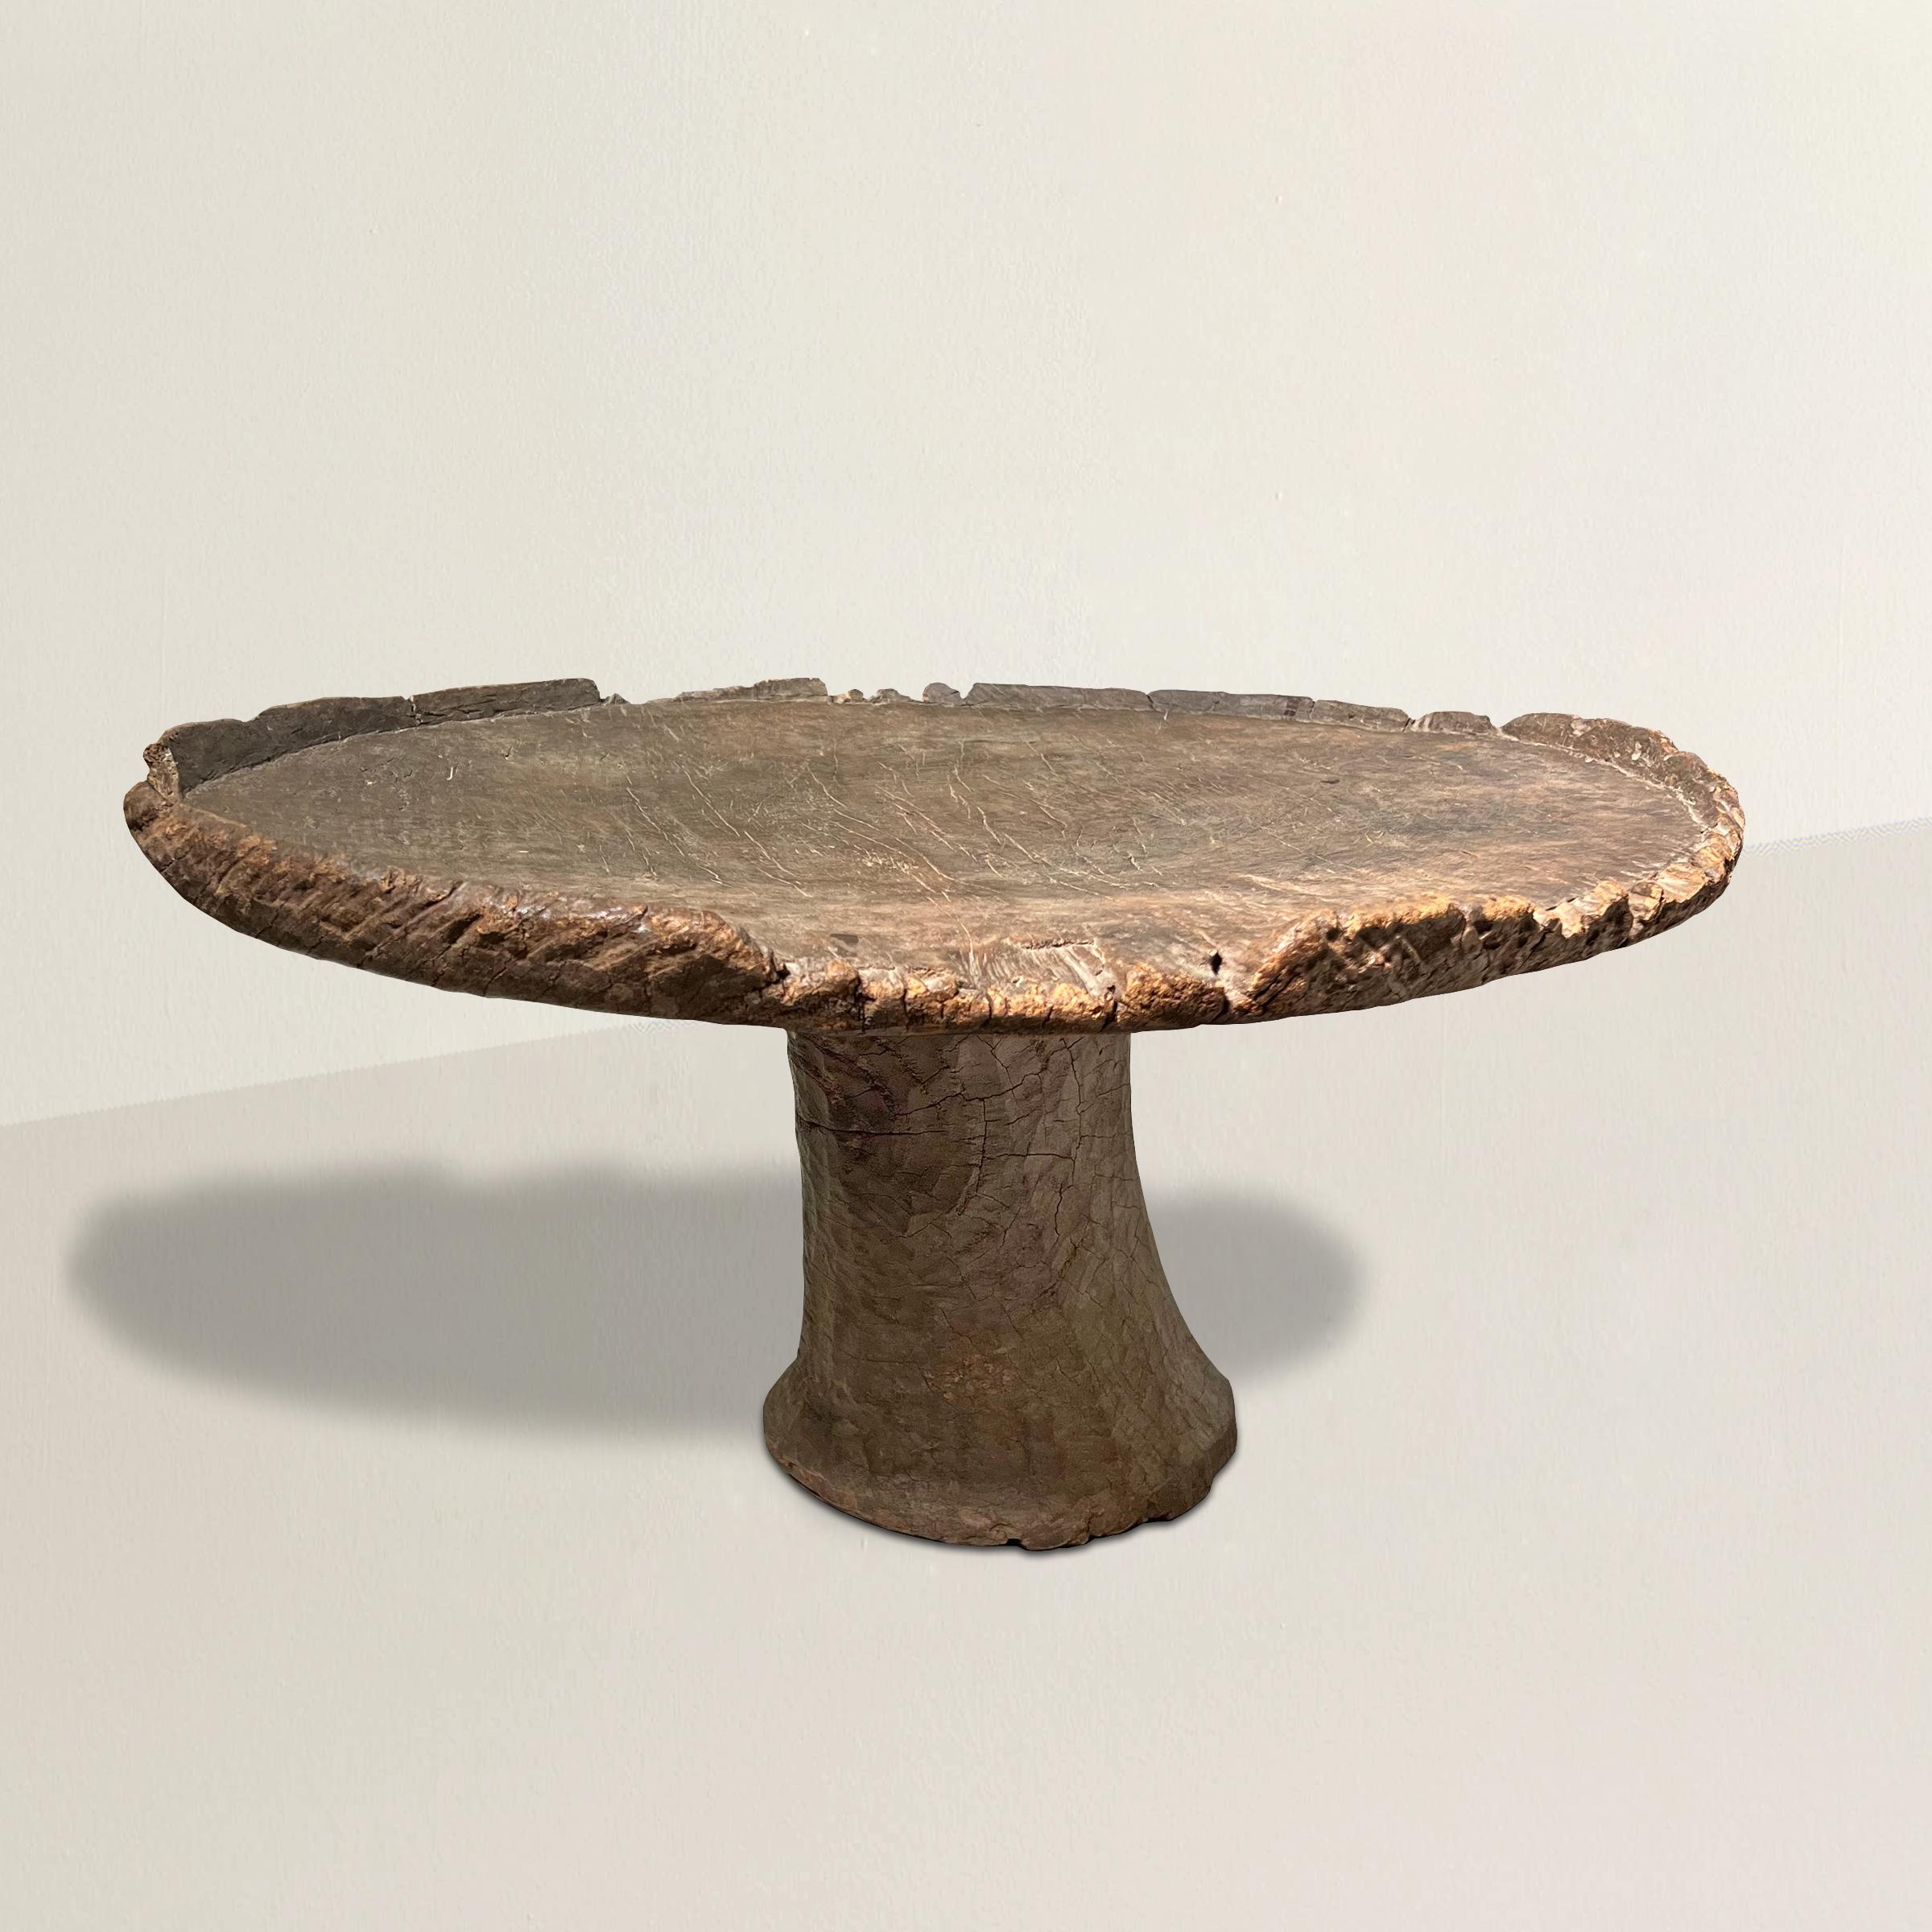 A rare and alluring Wabi-Sabi early 20th century Ethiopian table carved of one piece of wood with a round top with simple rim supported by a pedestal base. Originally used to serve food, this is the perfect cocktail table in your chic city apartment